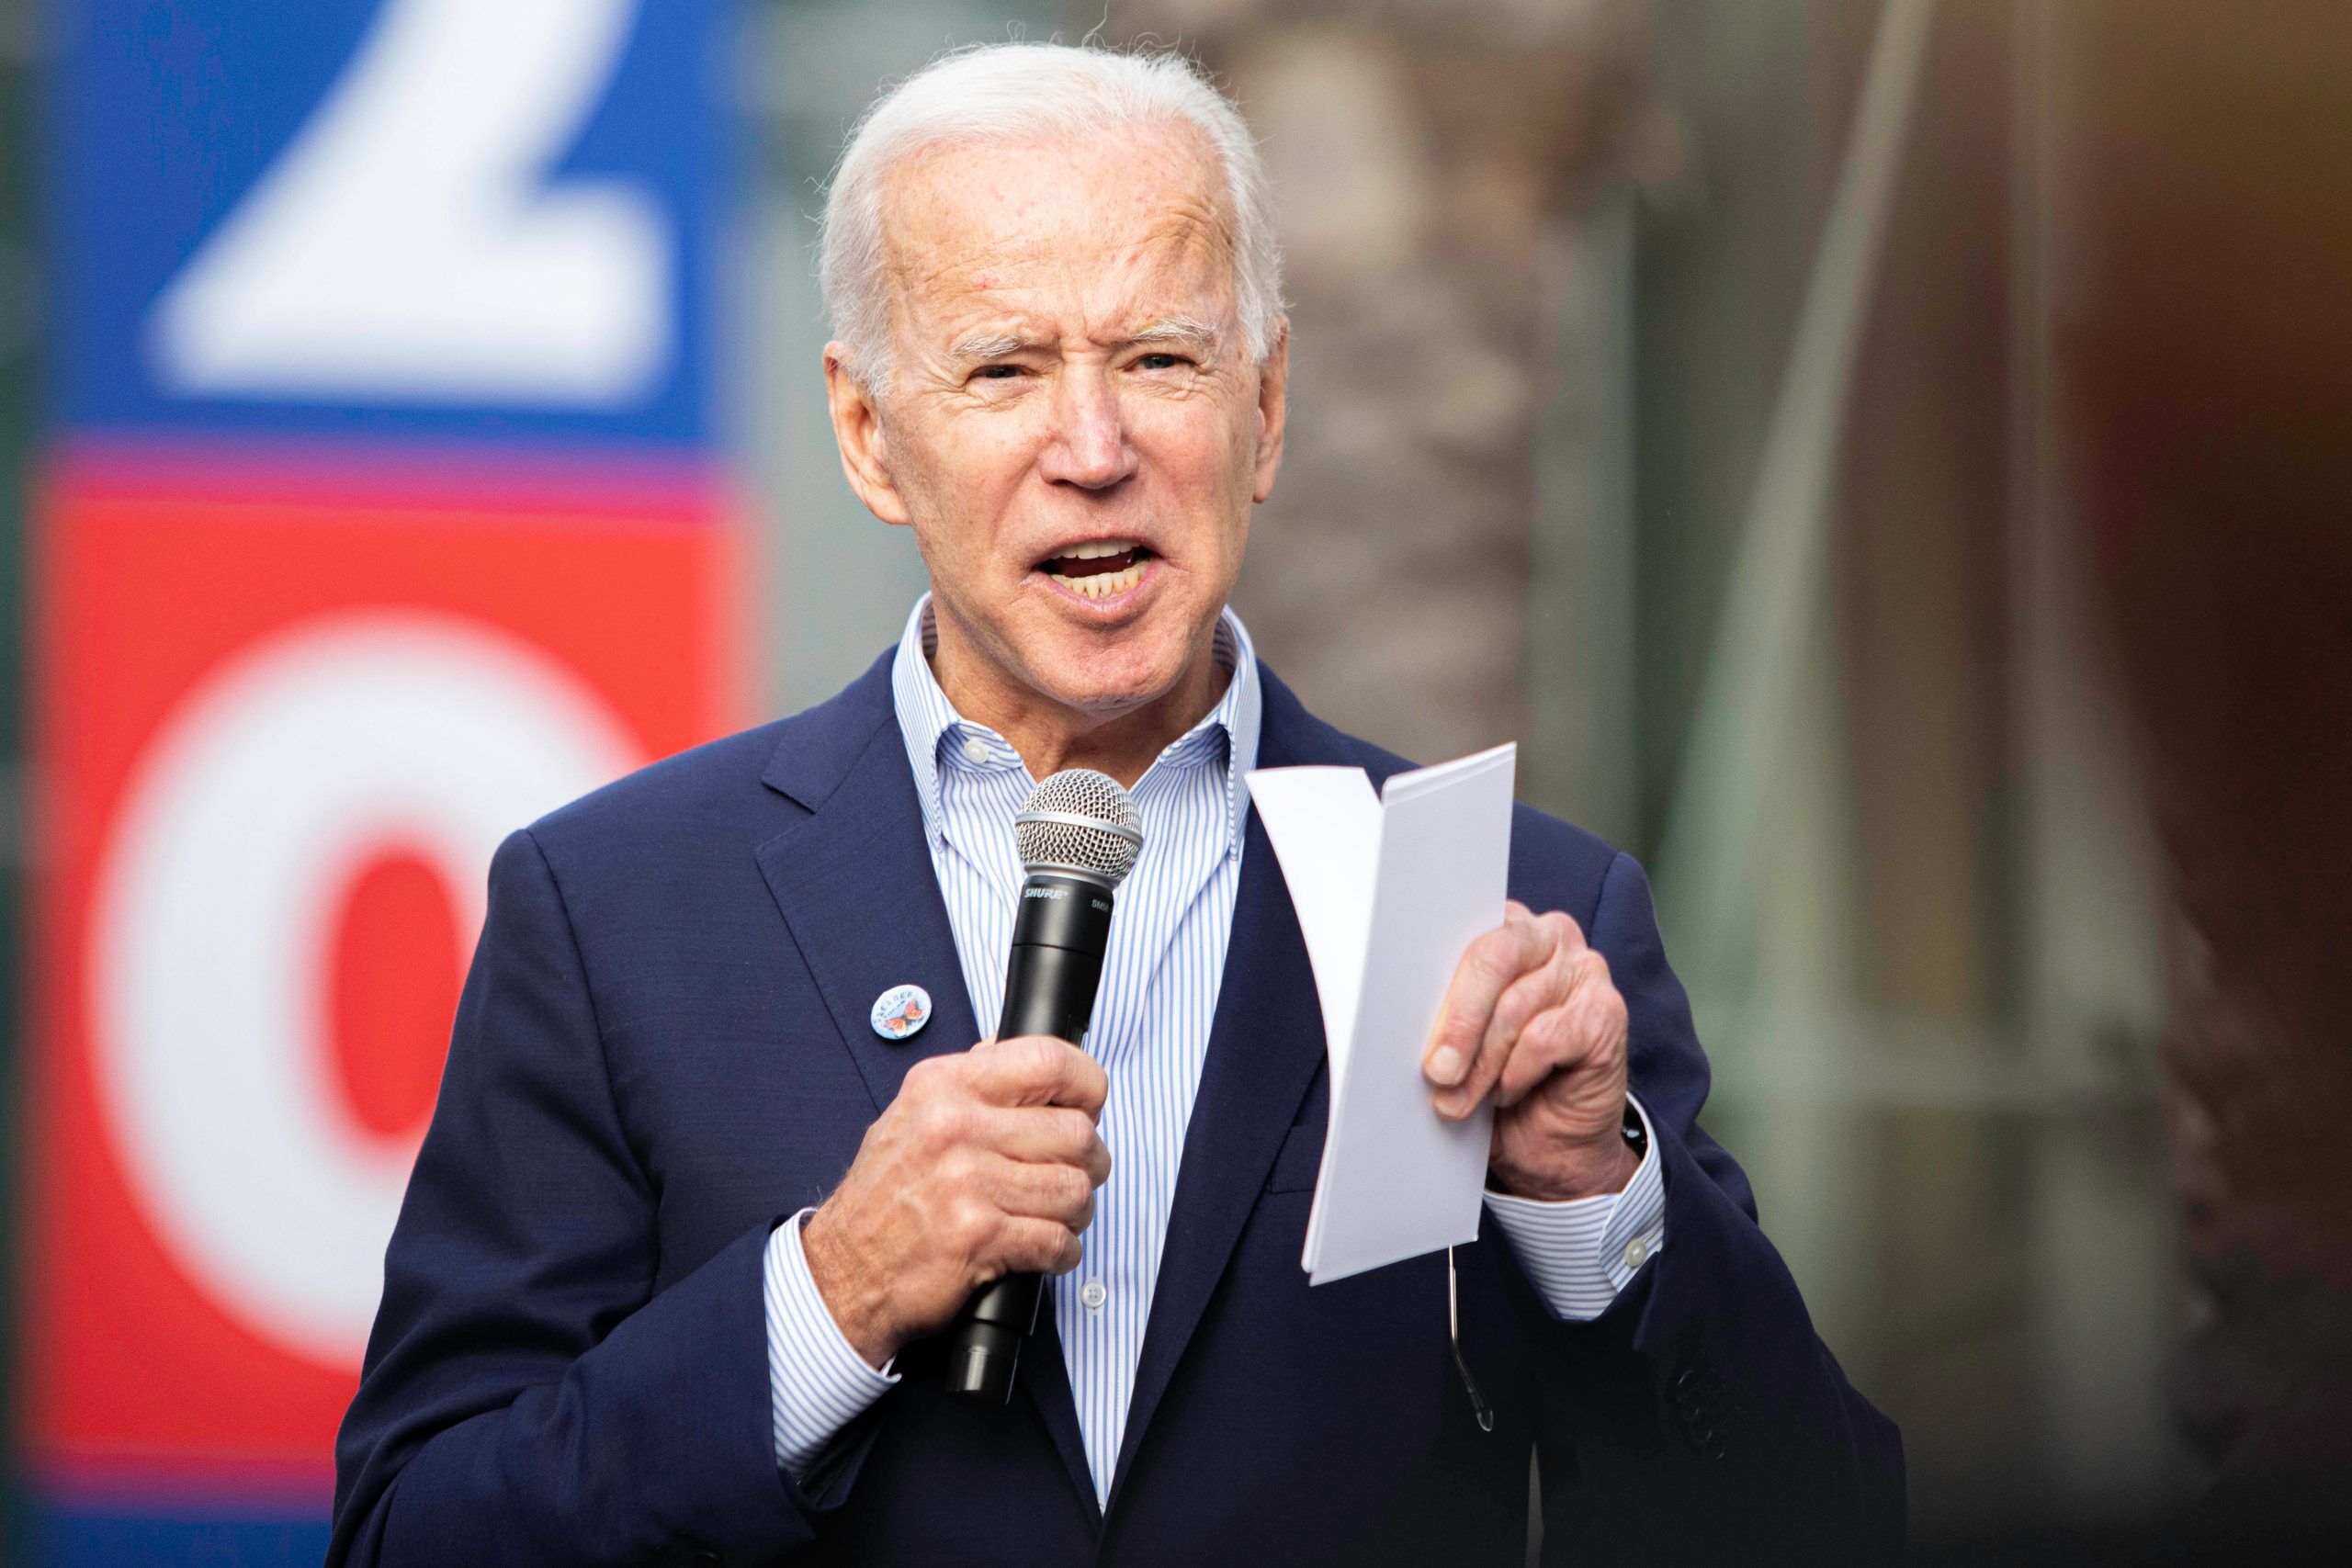 Presidential candidate Joe Biden, speaks during an event on Nov 14, 2019 at Los Angeles Trade–Technical College